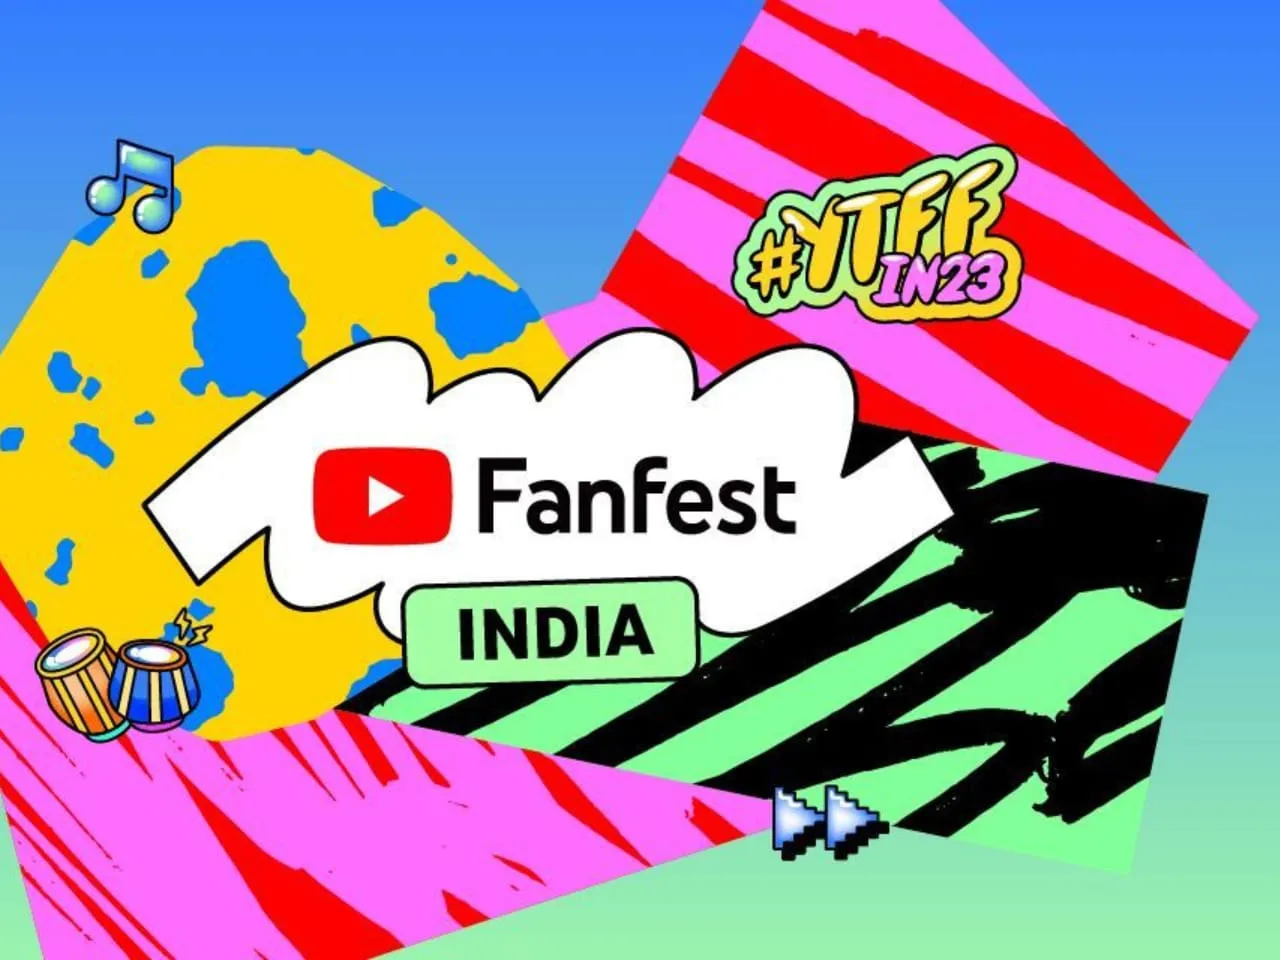 More than 5000 fans, creators and artists celebrate YouTube Fanfest live in Mumbai